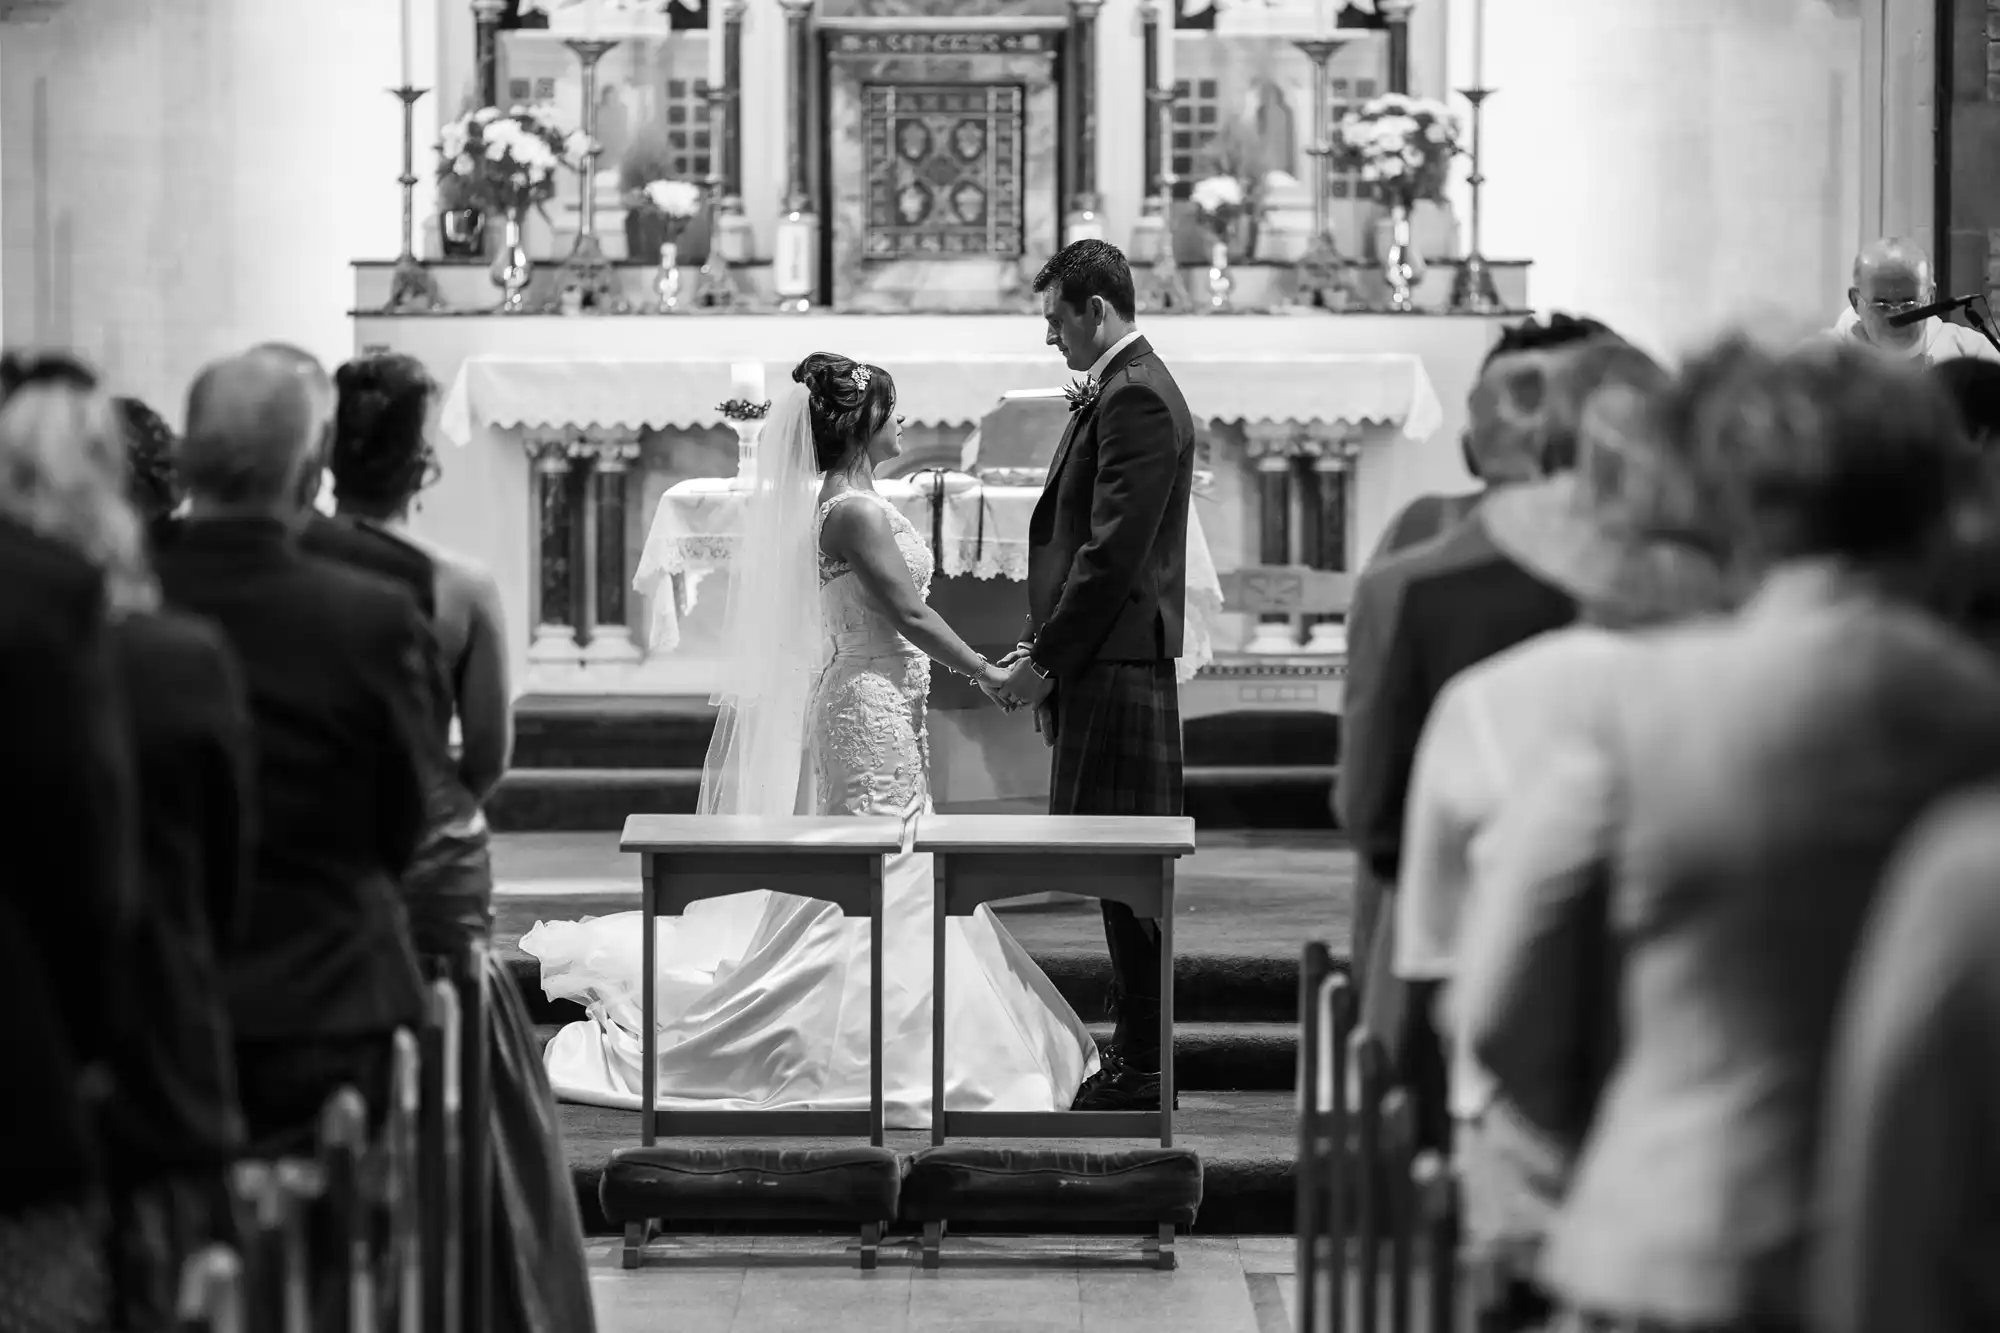 A bride and groom holding hands at the altar during a wedding ceremony in a church, viewed from behind the seated guests.